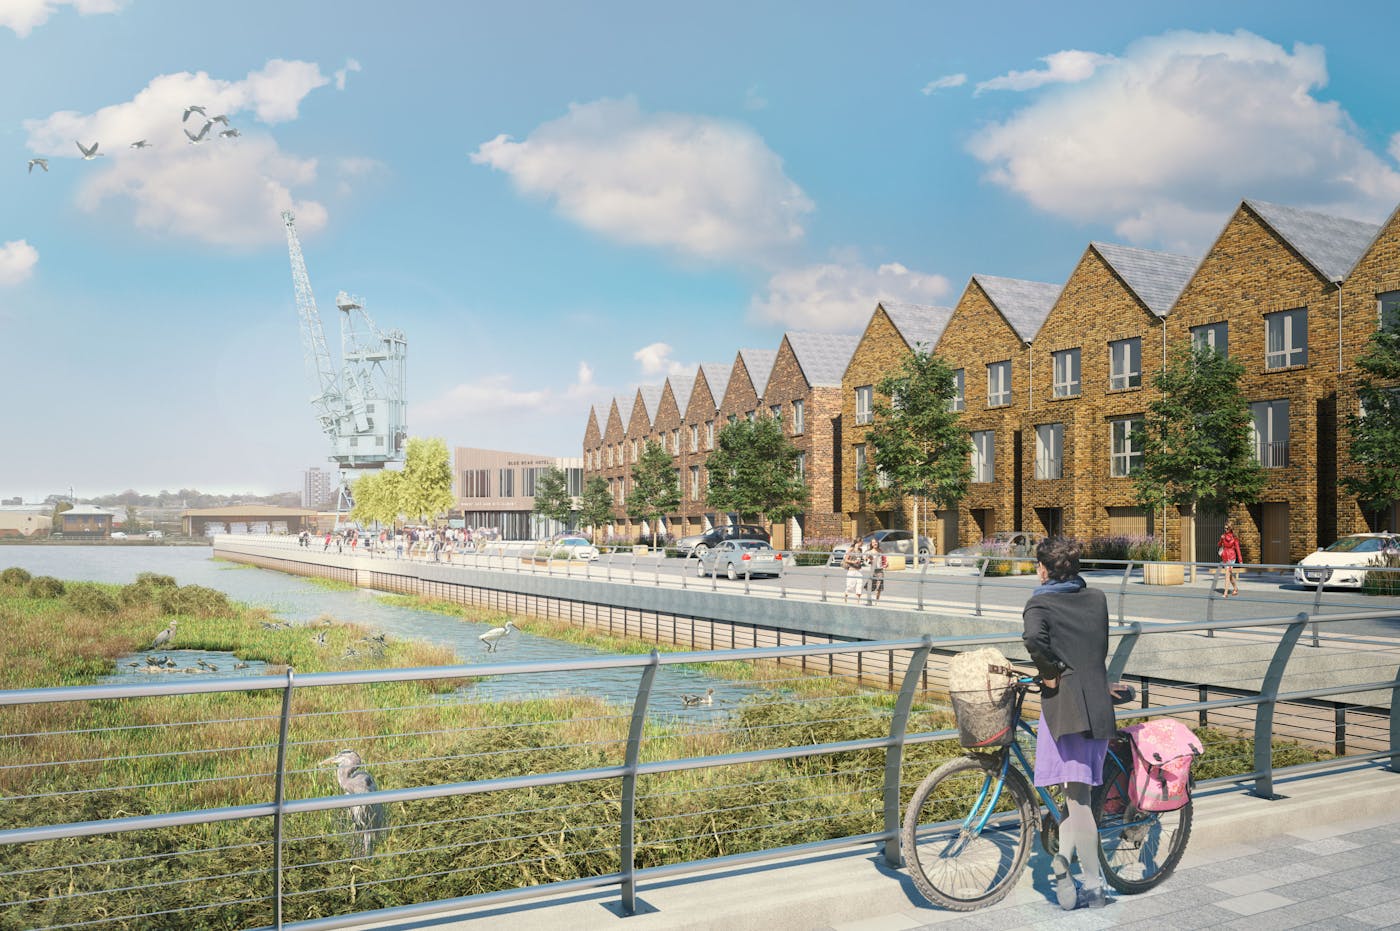 Rochester Riverside visualisation courtesy of BPTW architects